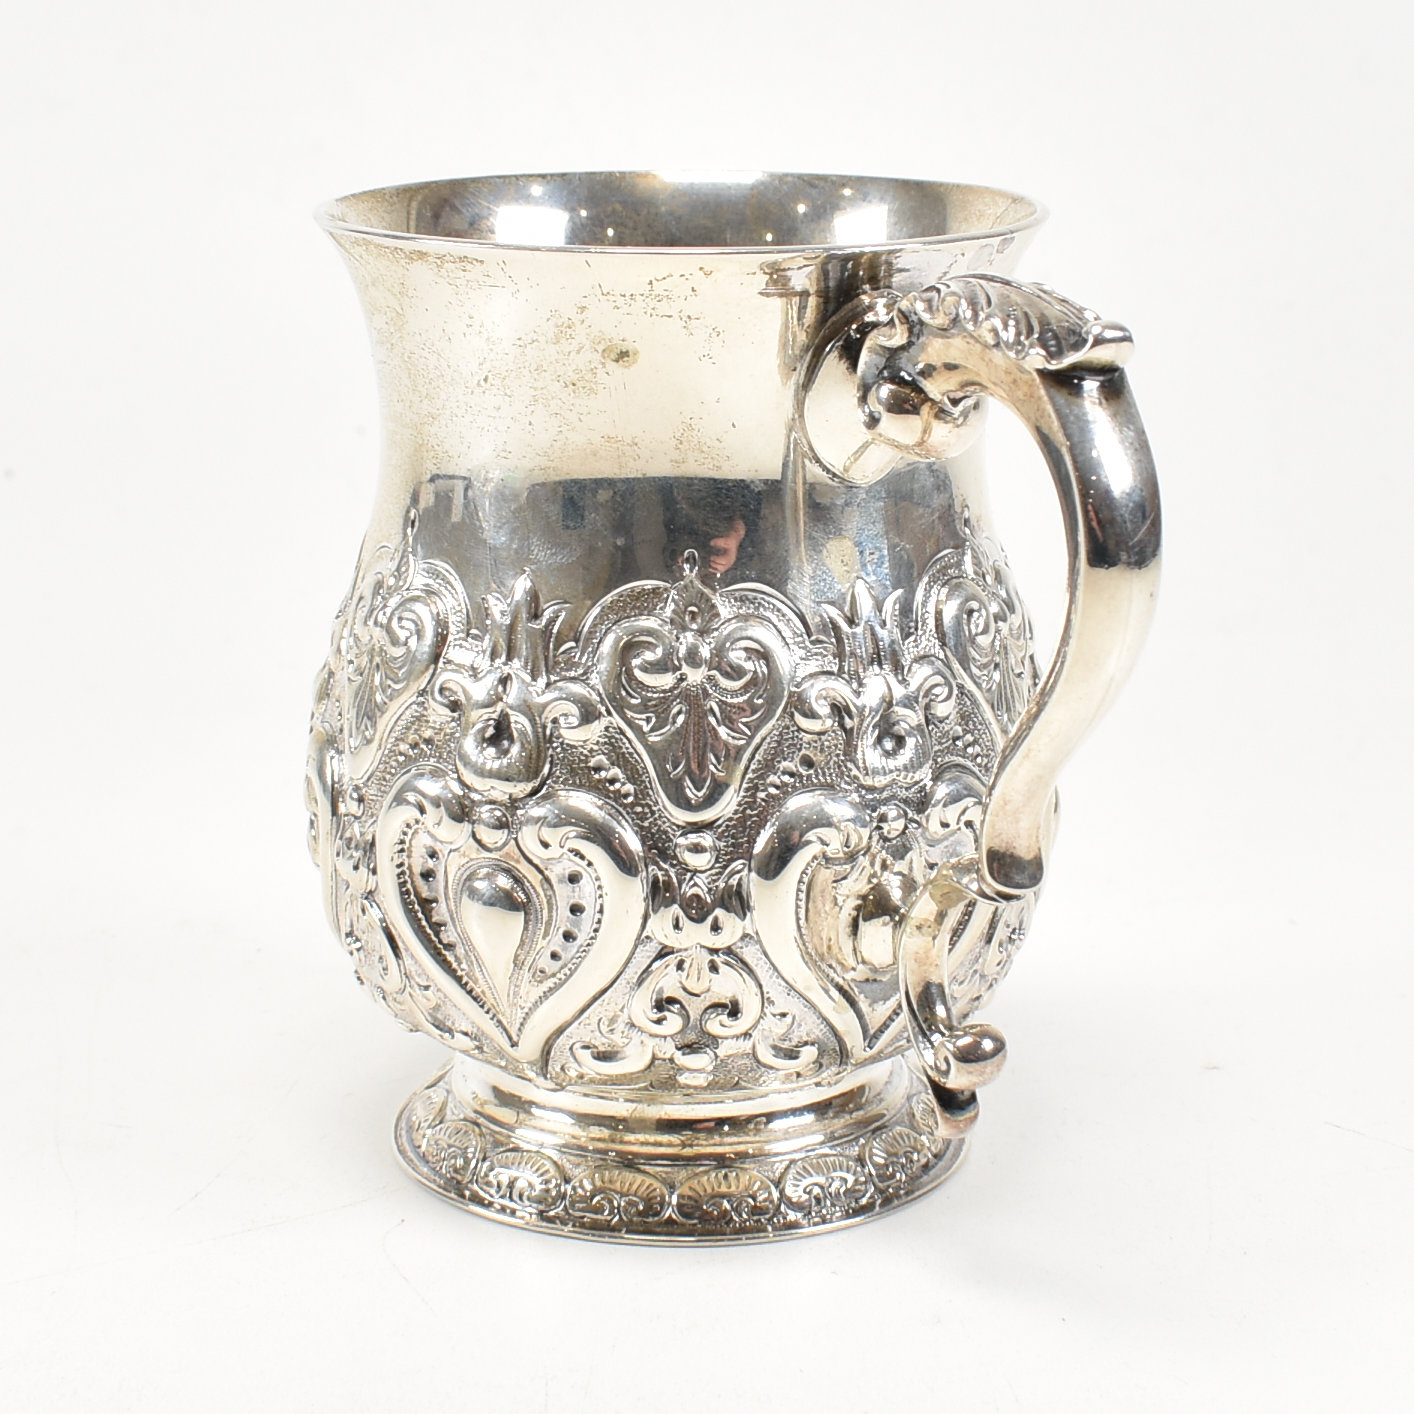 VICTORIAN HALLMARKED SILVER CHRISTENING CUP - Image 3 of 9